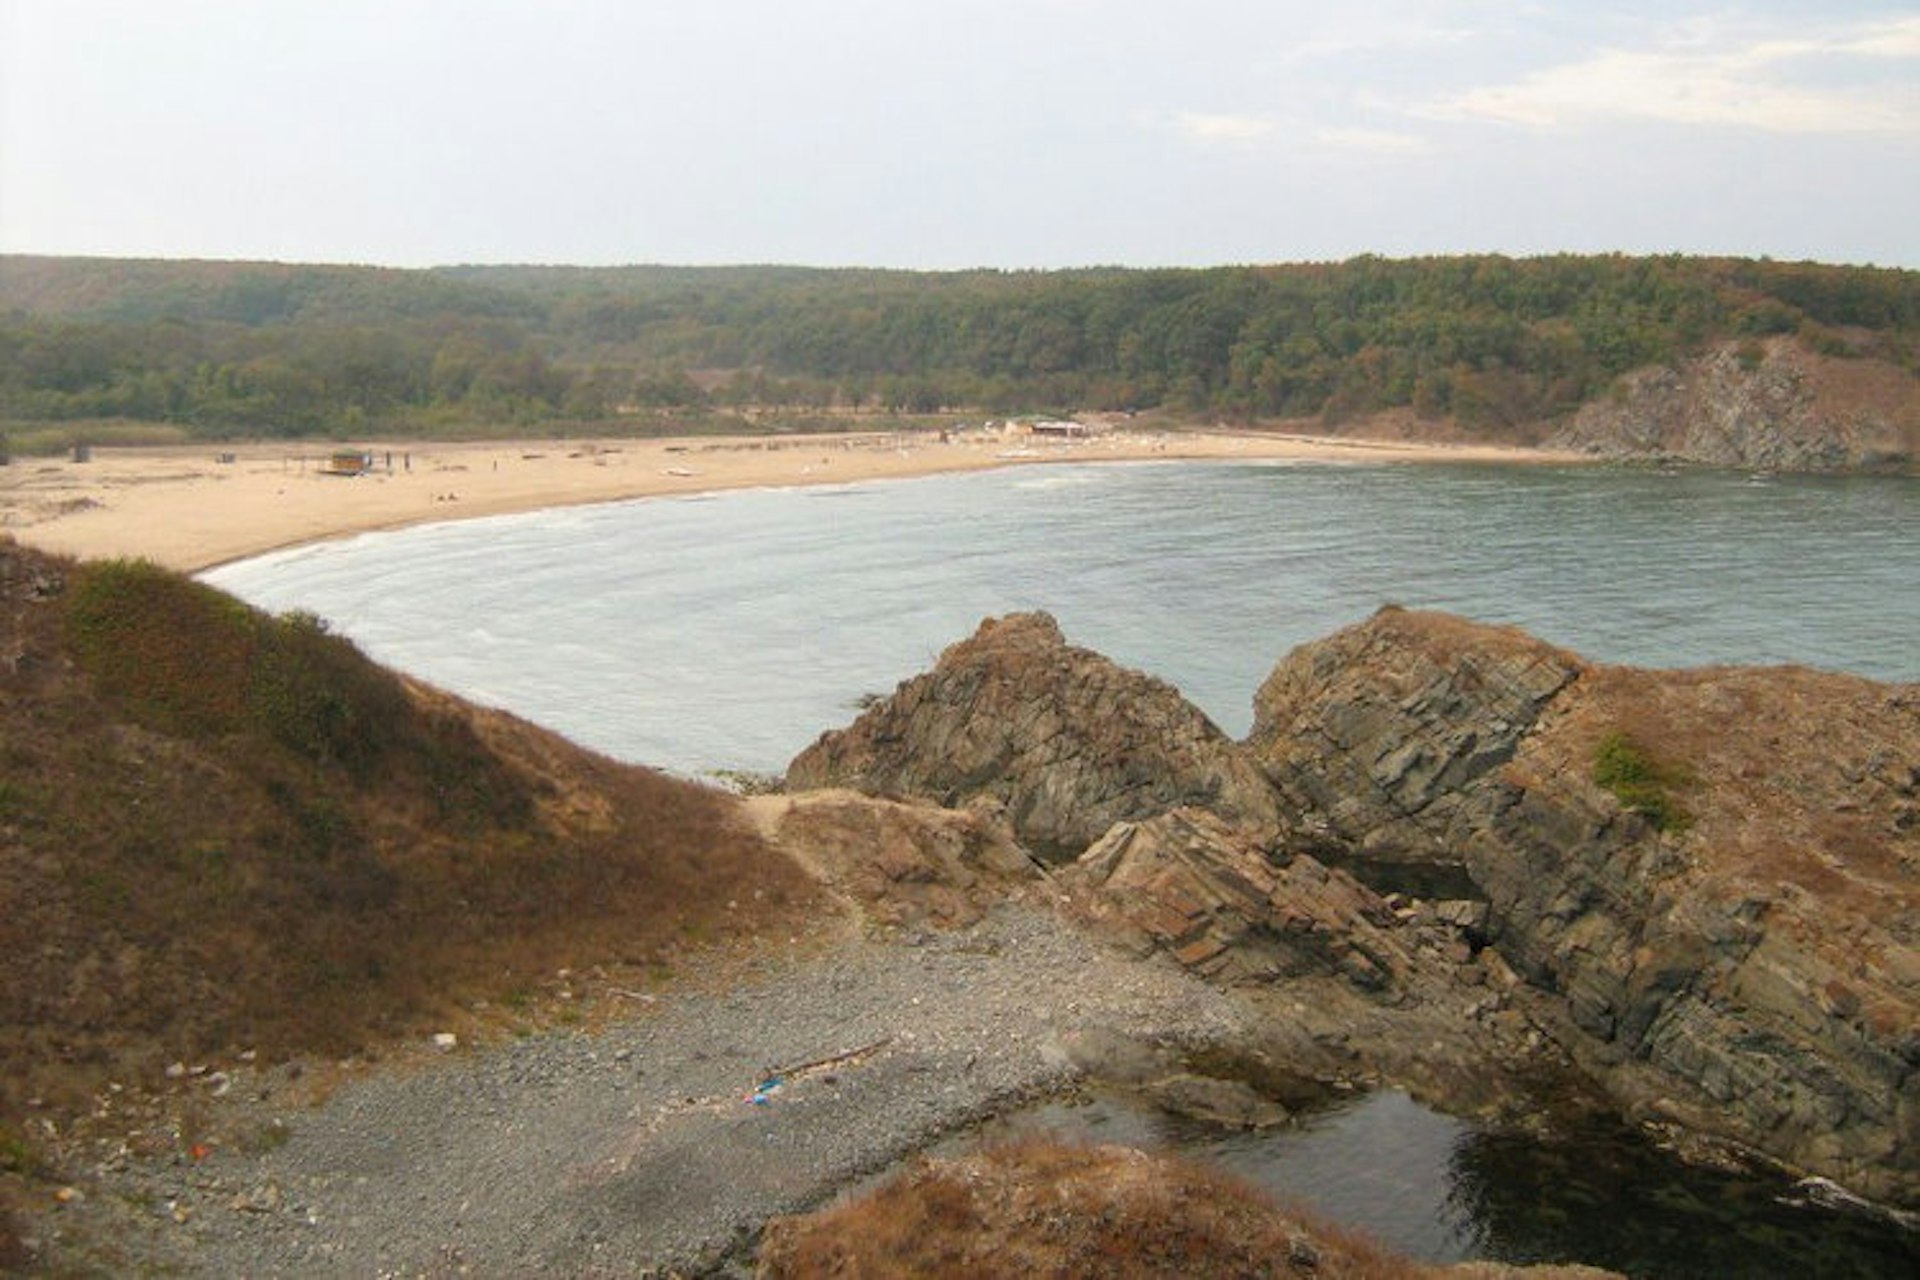 Remote and protected Silistar beach. Image by Petyo Ivanov / CC BY 2.0